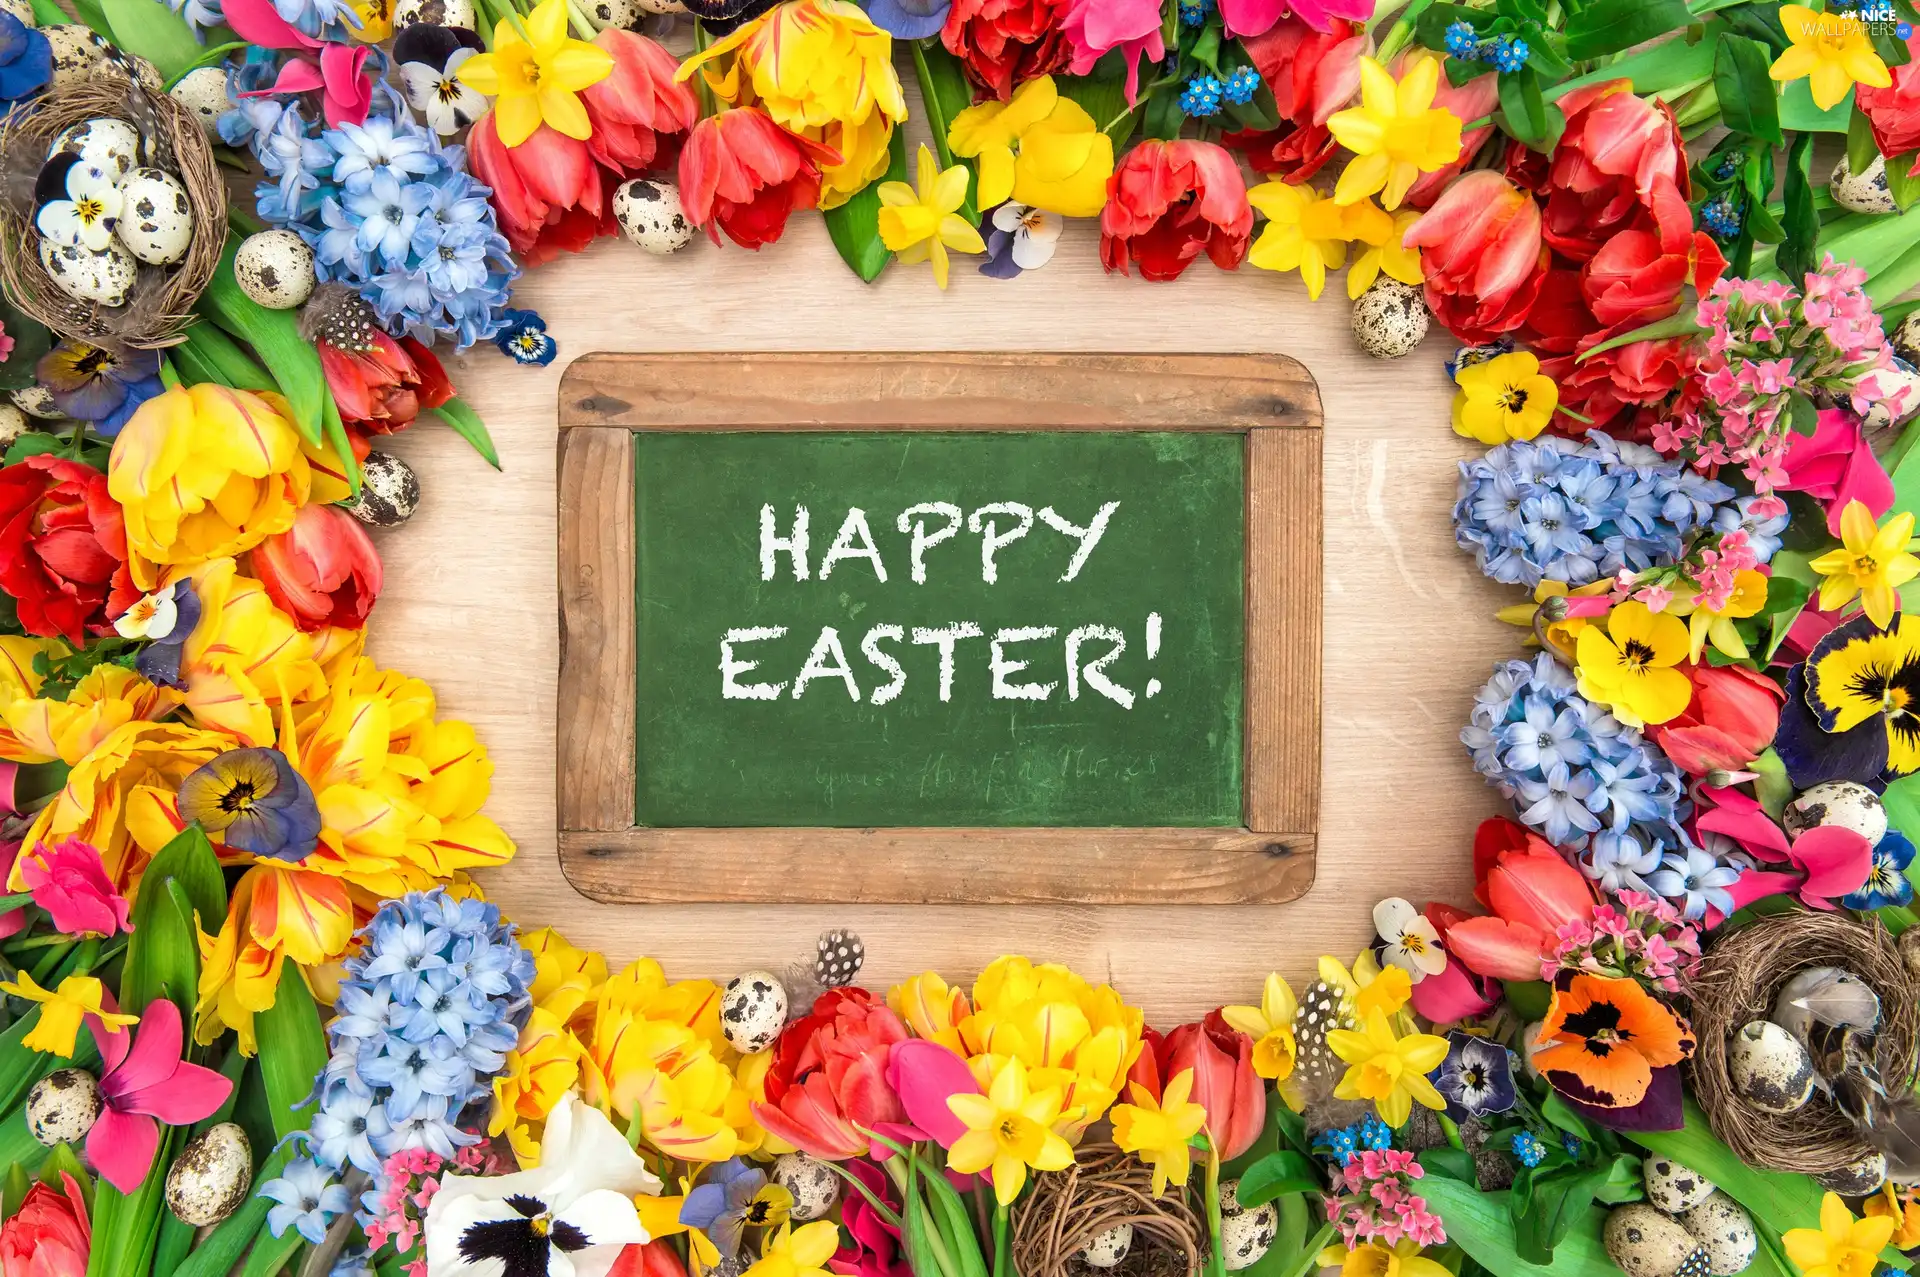 Sockets, Flowers, Tulips, text, Daffodils, pansies, plate, boarding, Happy Easter, Easter, eggs, Hyacinths, Spring